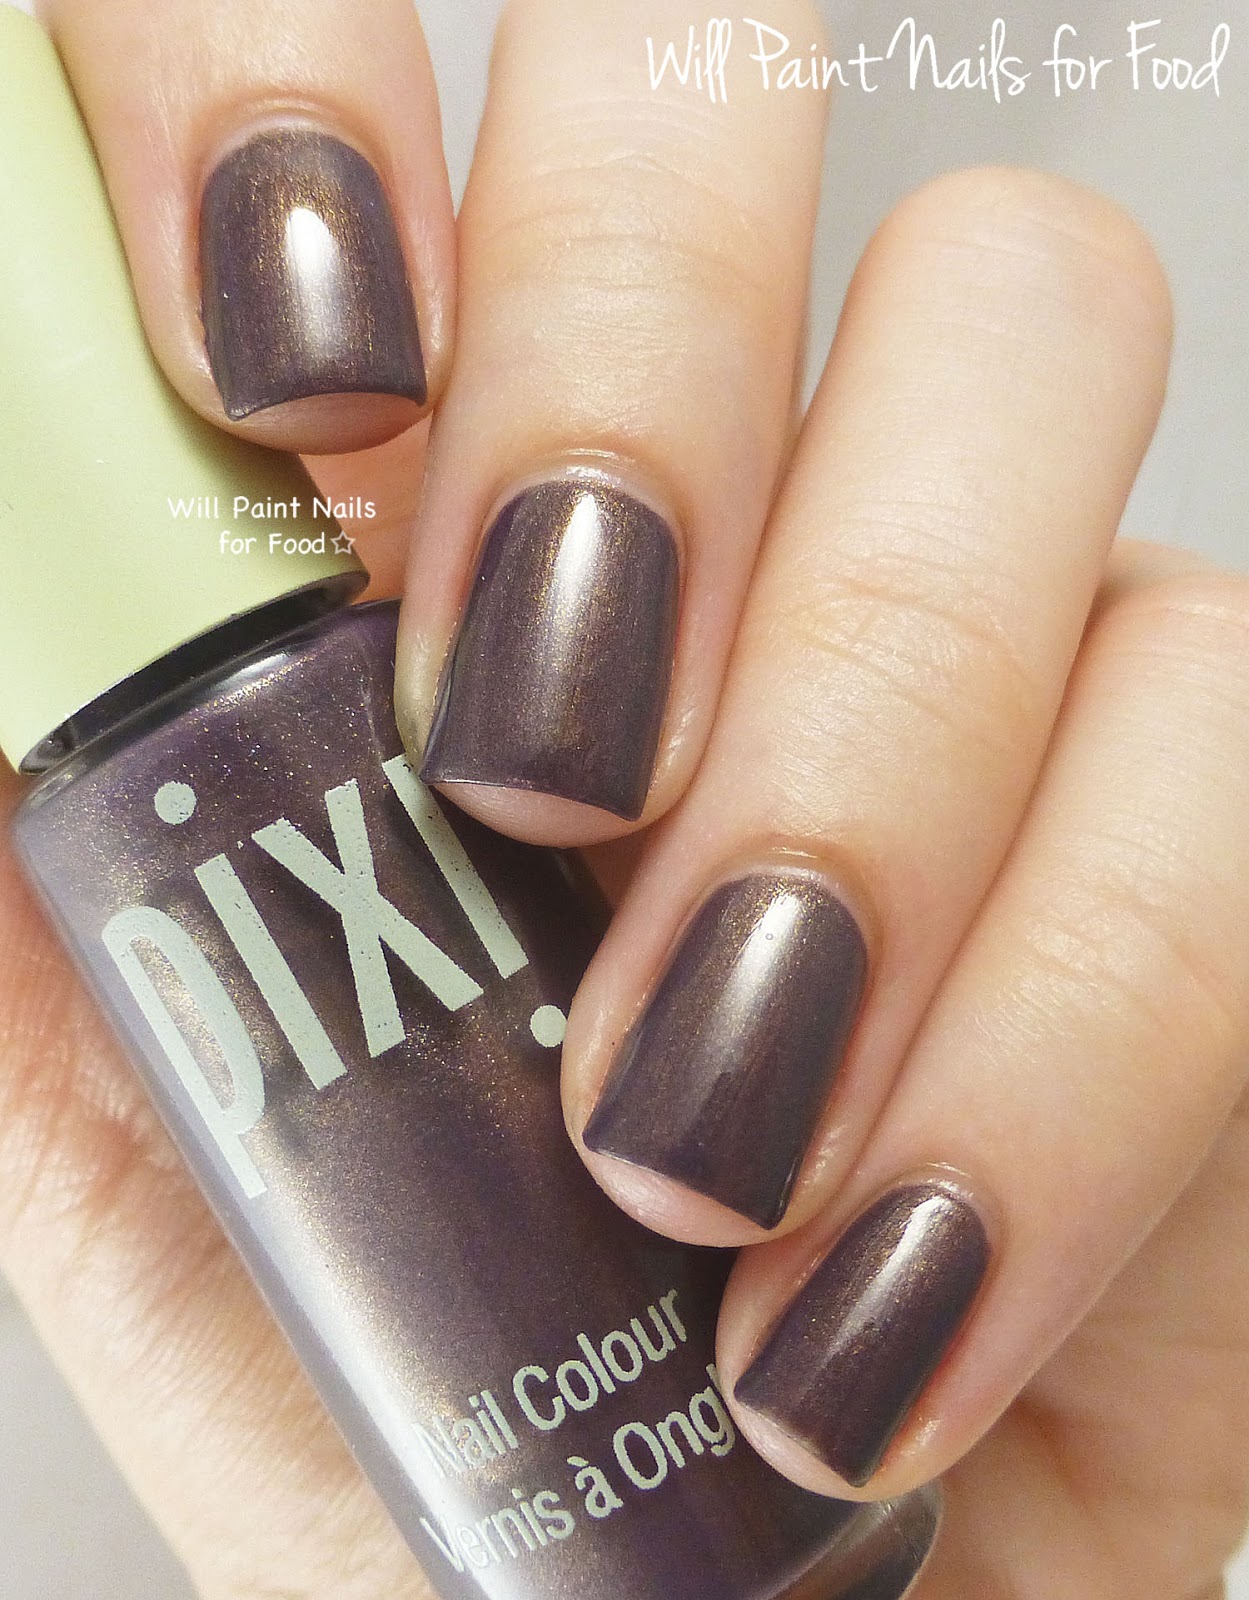 Pixi Nail Colour in Classy Cocoa swatch